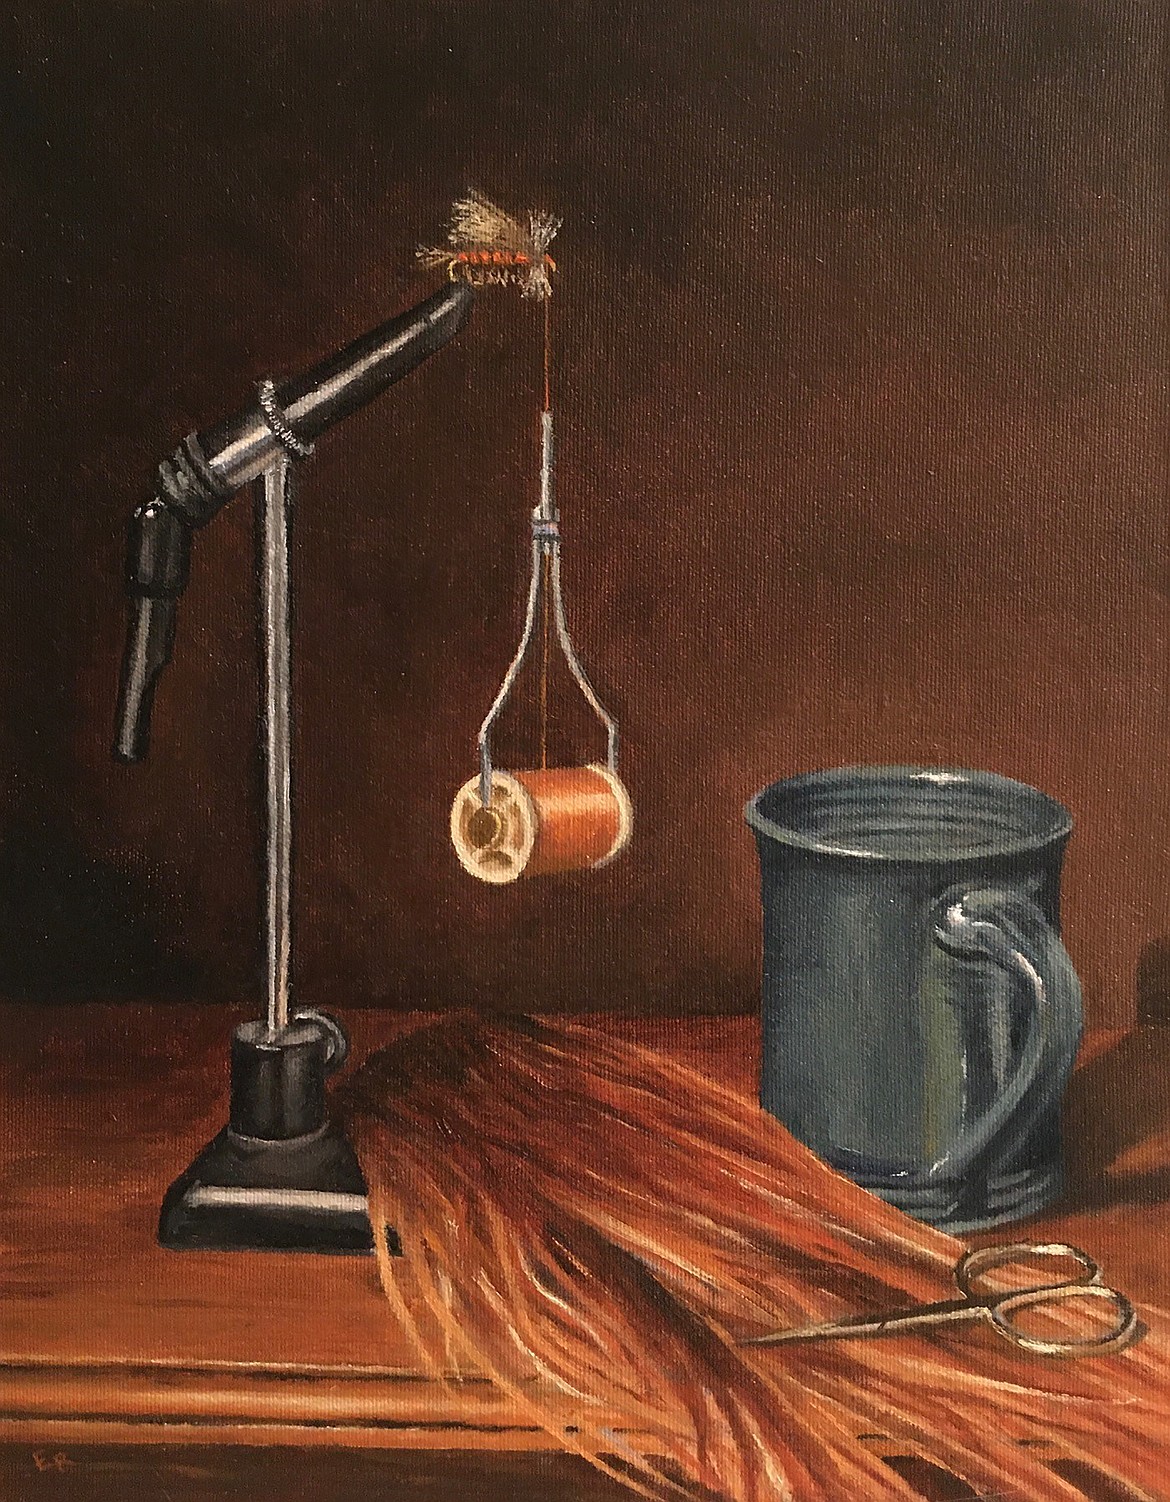 “The Art of Fly Fishing” exhibit artists’ reception hosted by Pend Oreille Arts Council and Trout Unlimited will be held on Friday, Aug. 21 from 5:30 to 7 p.m. at the Old Power House, 120 Lake St. Pictured is Ed Robinson’s painting,  “Filling the Fly Box”.